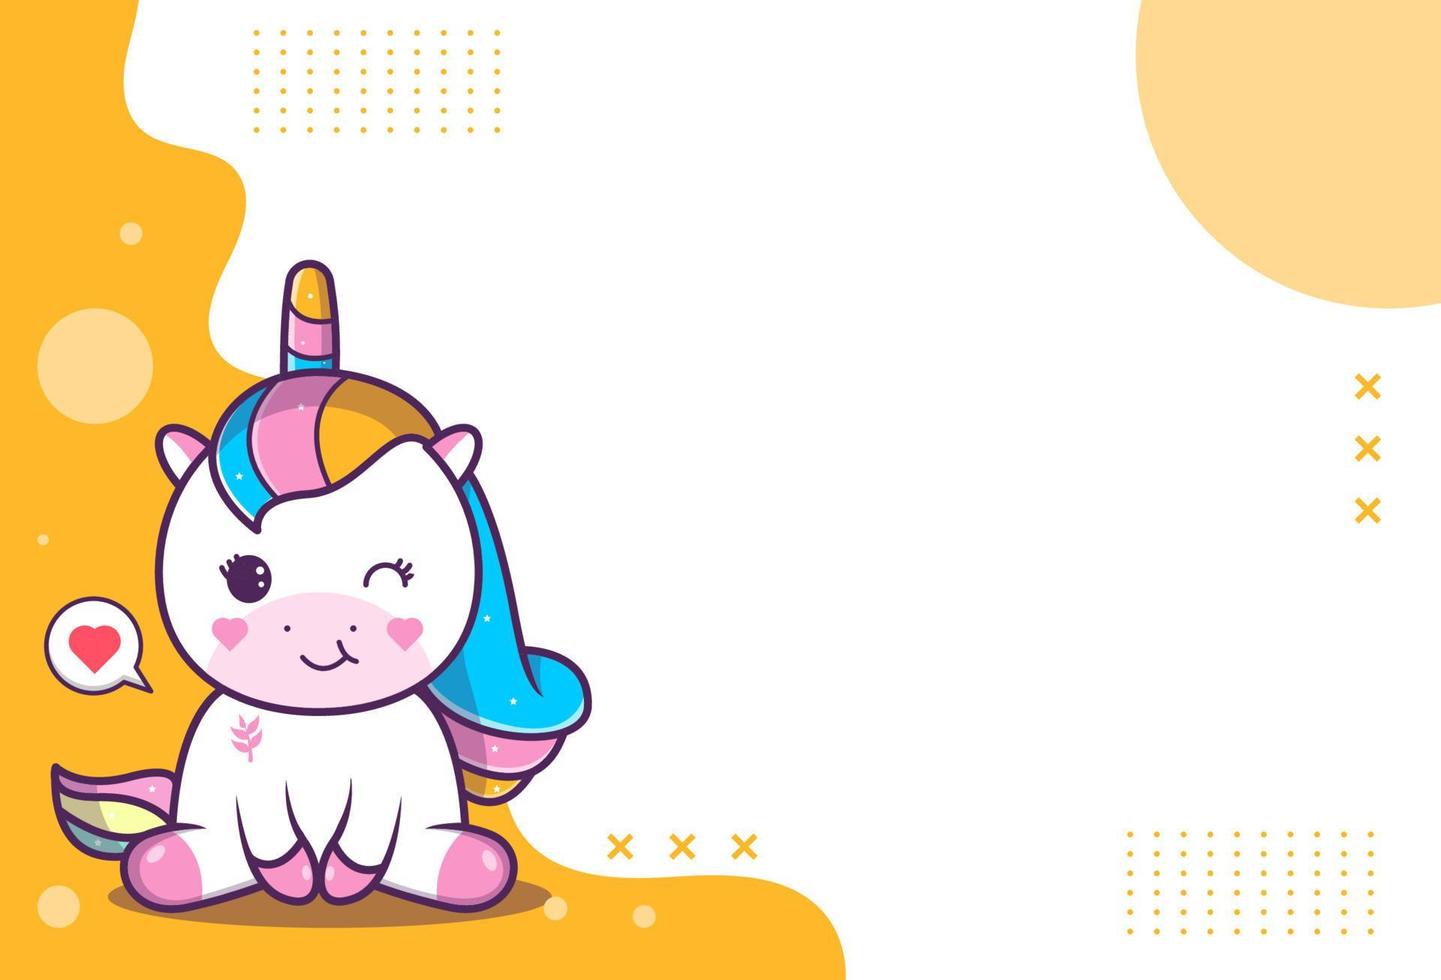 cute background of cute unicorn characters, unicorn sitting no love symbol, perfect for social media and business posts. Vector eps 10